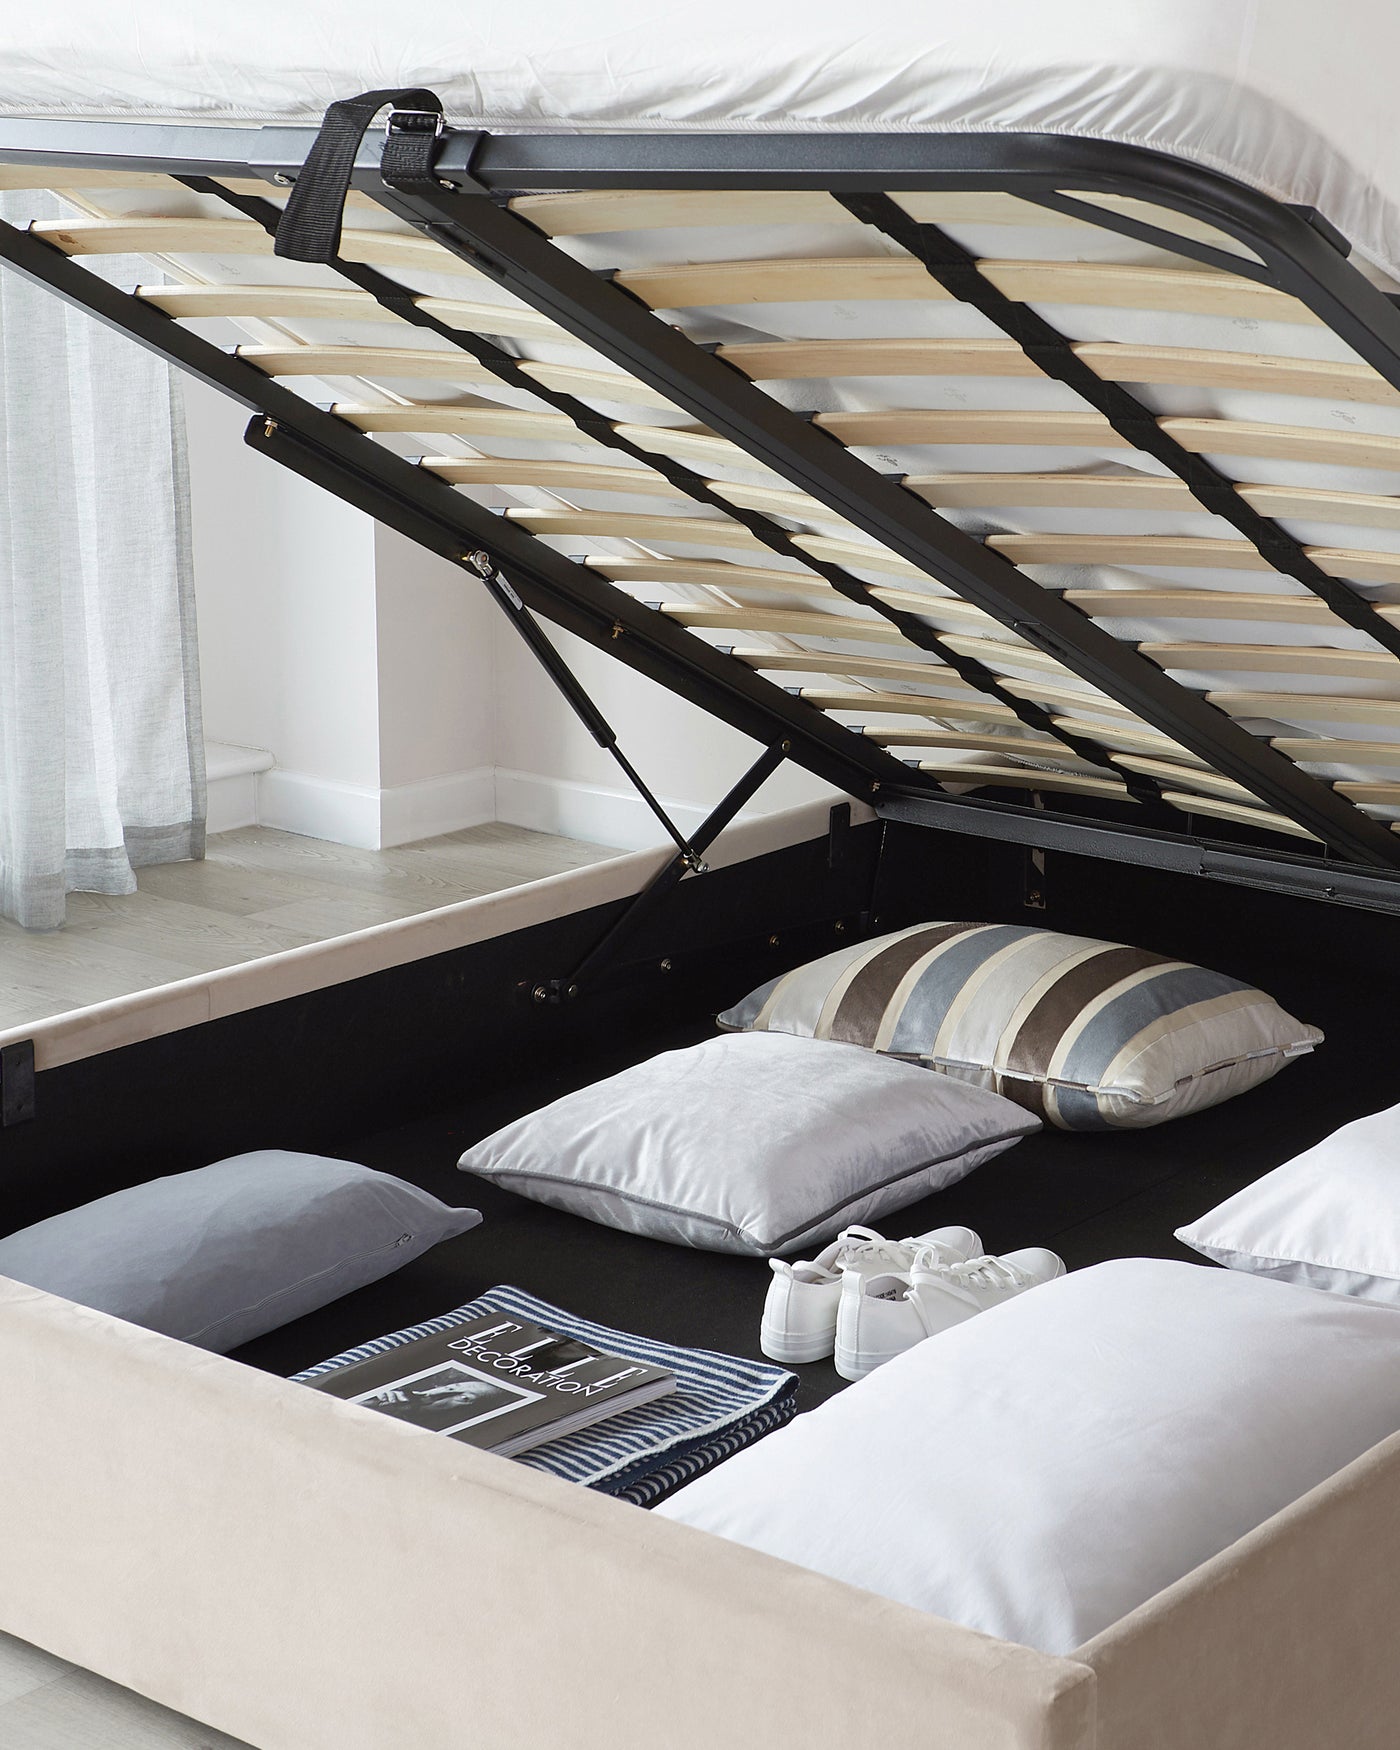 Contemporary upholstered storage bed with a lifting frame revealing a spacious storage compartment underneath. The bed features a beige fabric finish and a slatted wood mattress support which is elevated, with a black support mechanism visible. Inside the storage space are various pillows and a magazine, indicating the bed's utility for storing bedding and personal items.